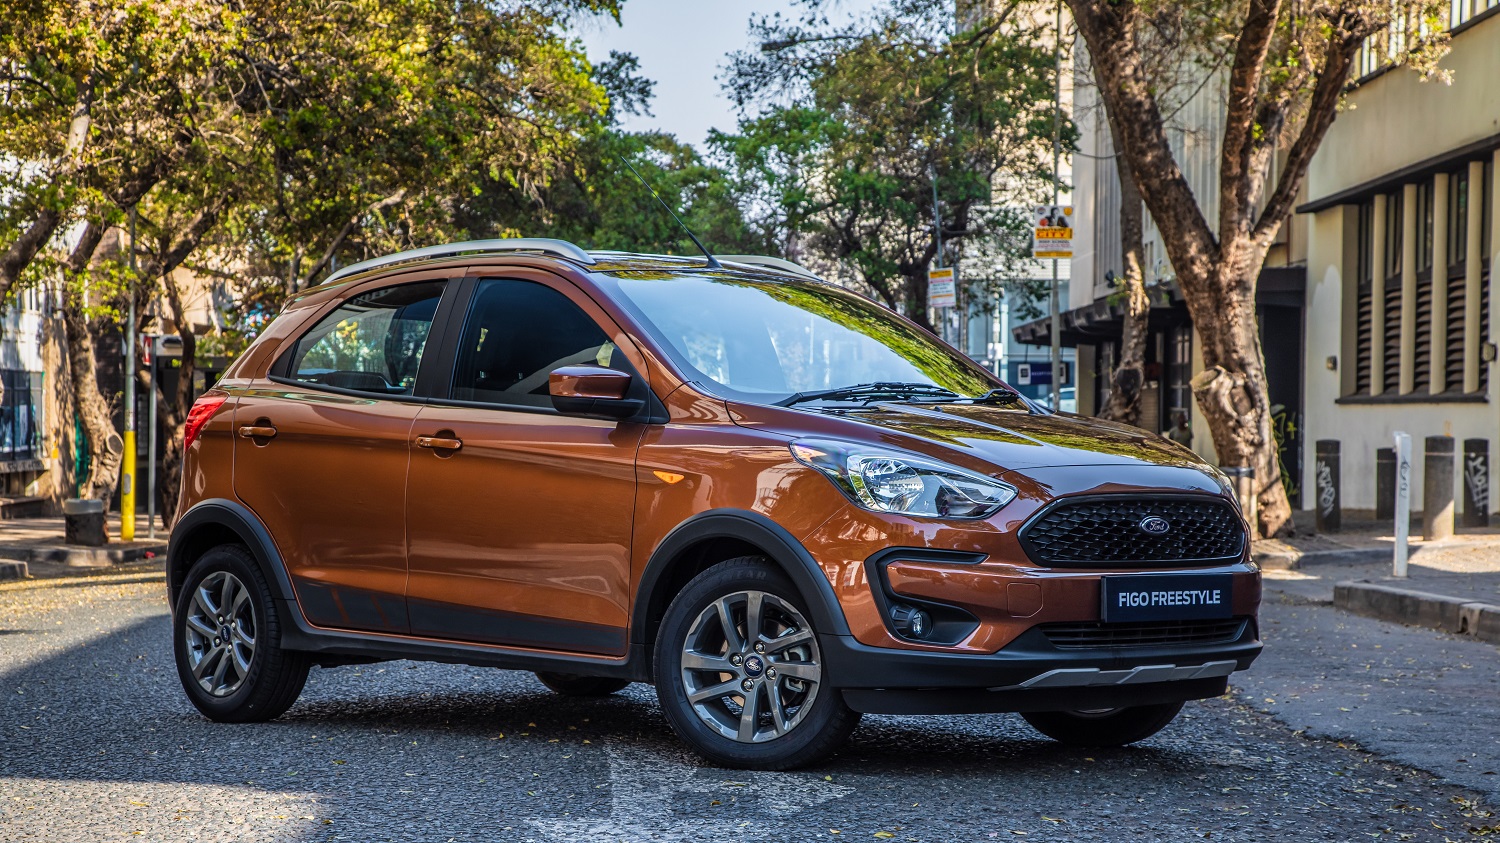 Ford Freestyle Flair Edition Brochure Reveals Details About New Variant